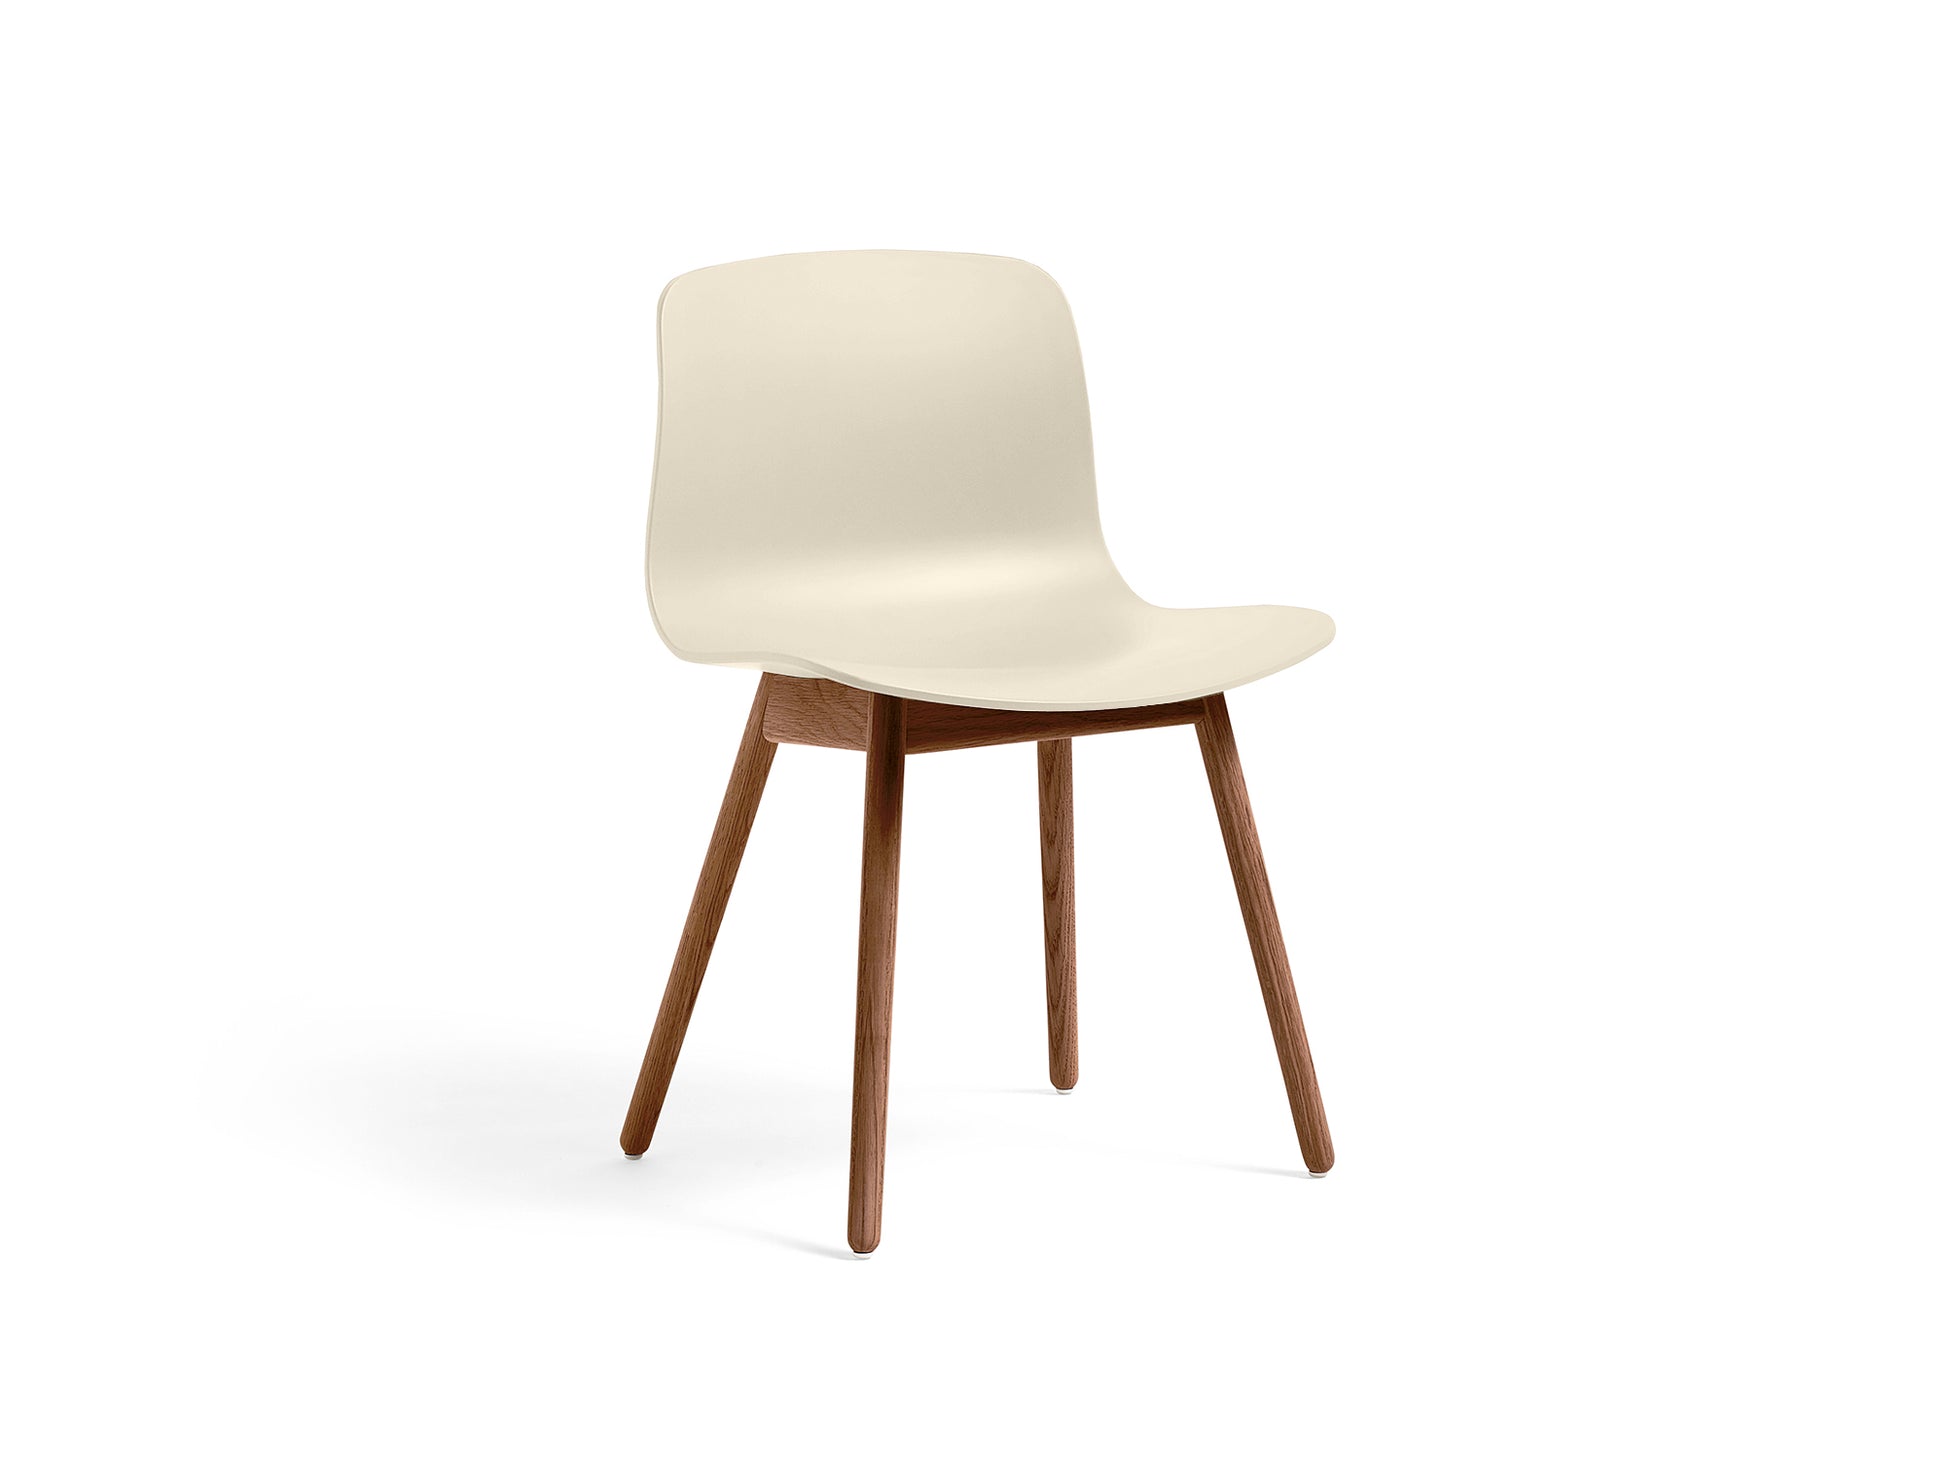 About A Chair AAC 12 by HAY - Melange Cream 2.0 Shell / Lacquered Walnut Base